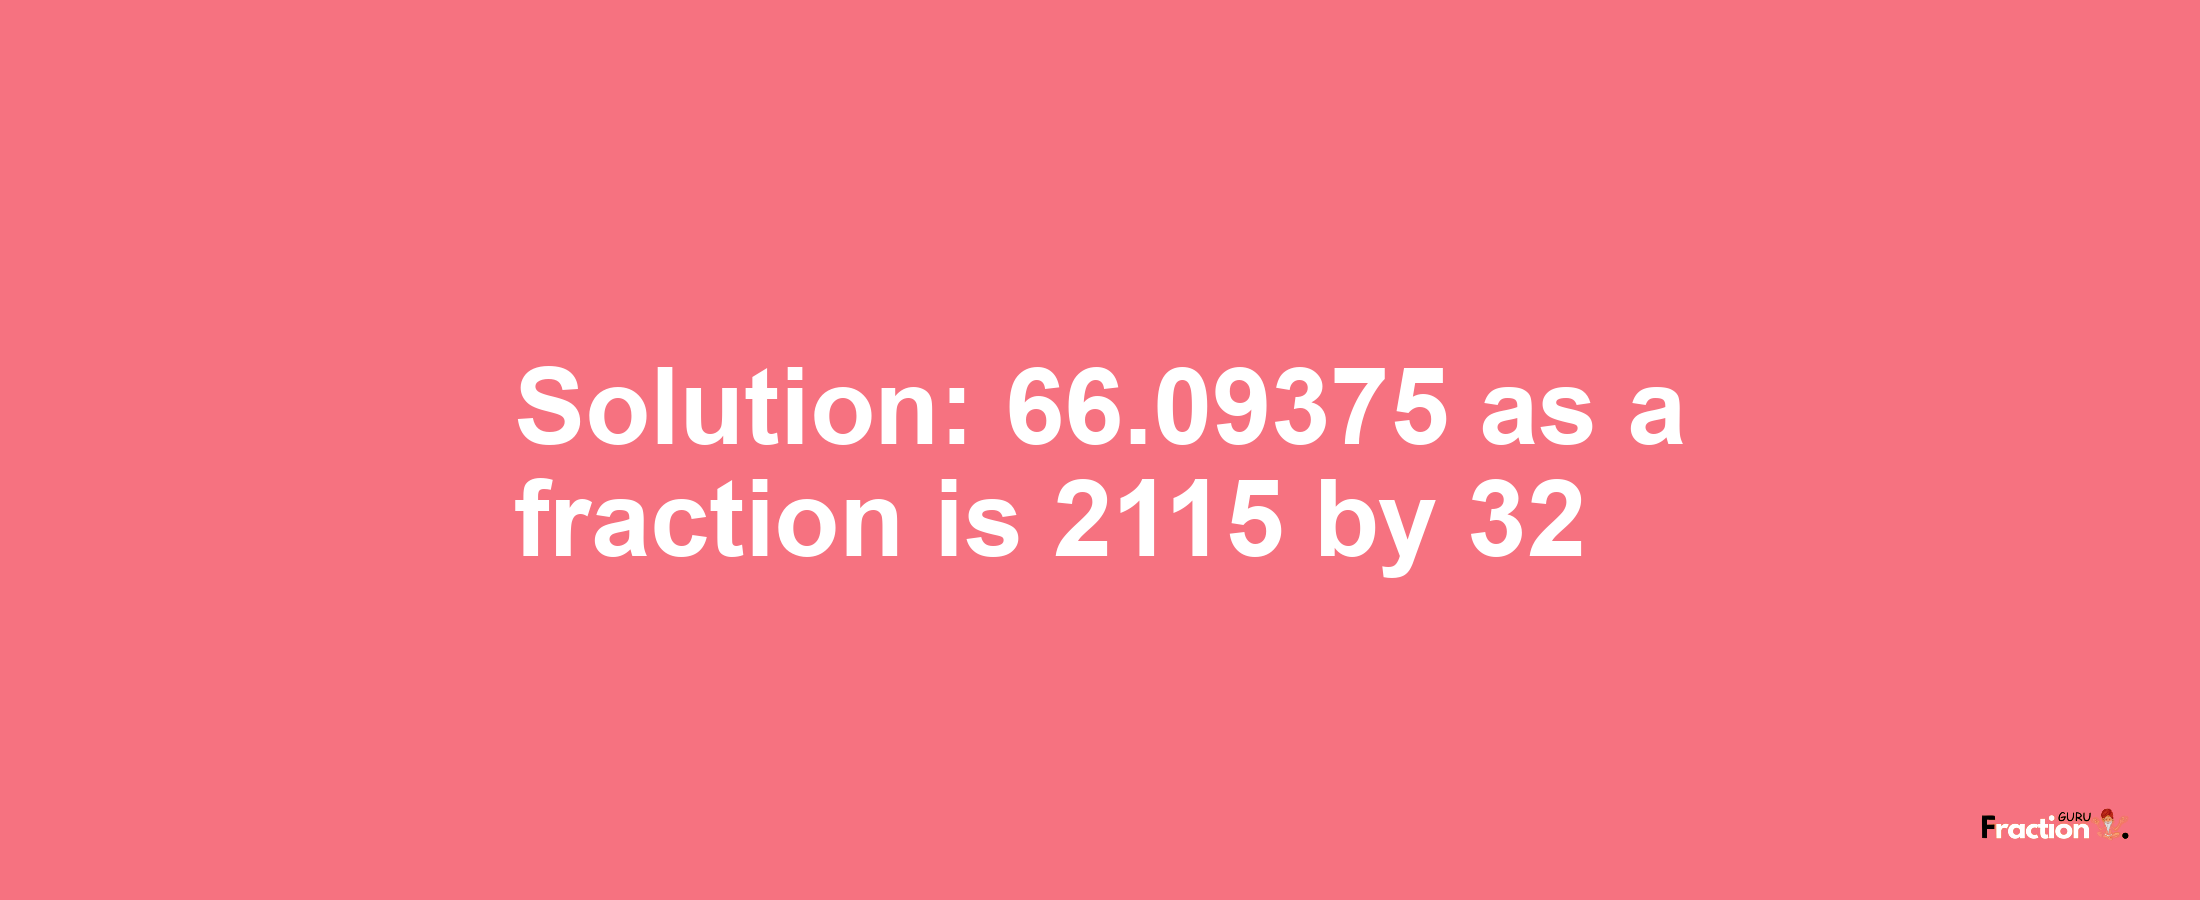 Solution:66.09375 as a fraction is 2115/32